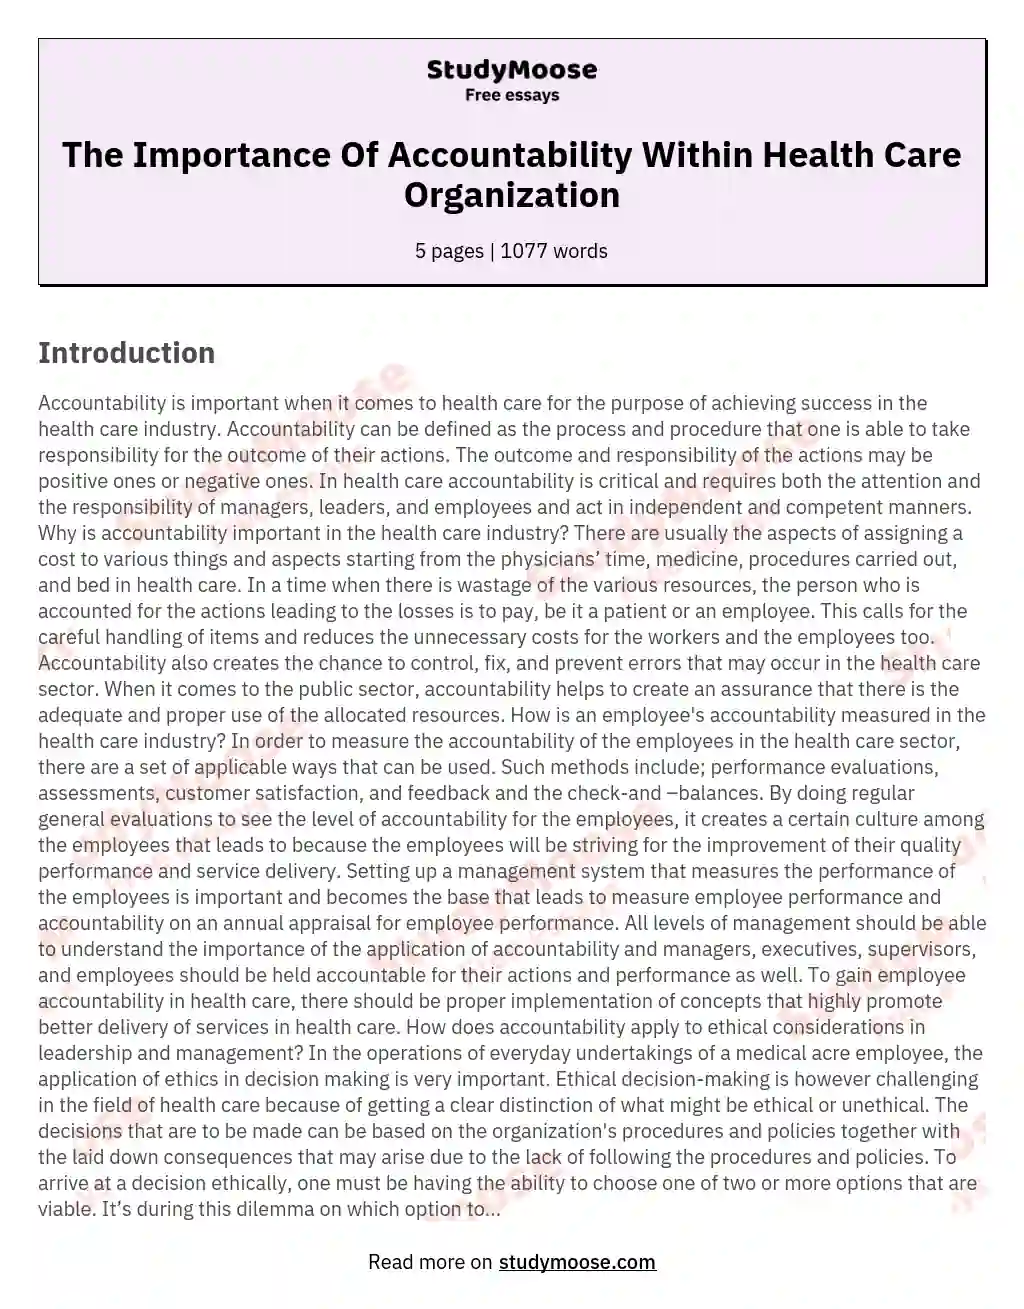 The Importance Of Accountability Within Health Care Organization essay